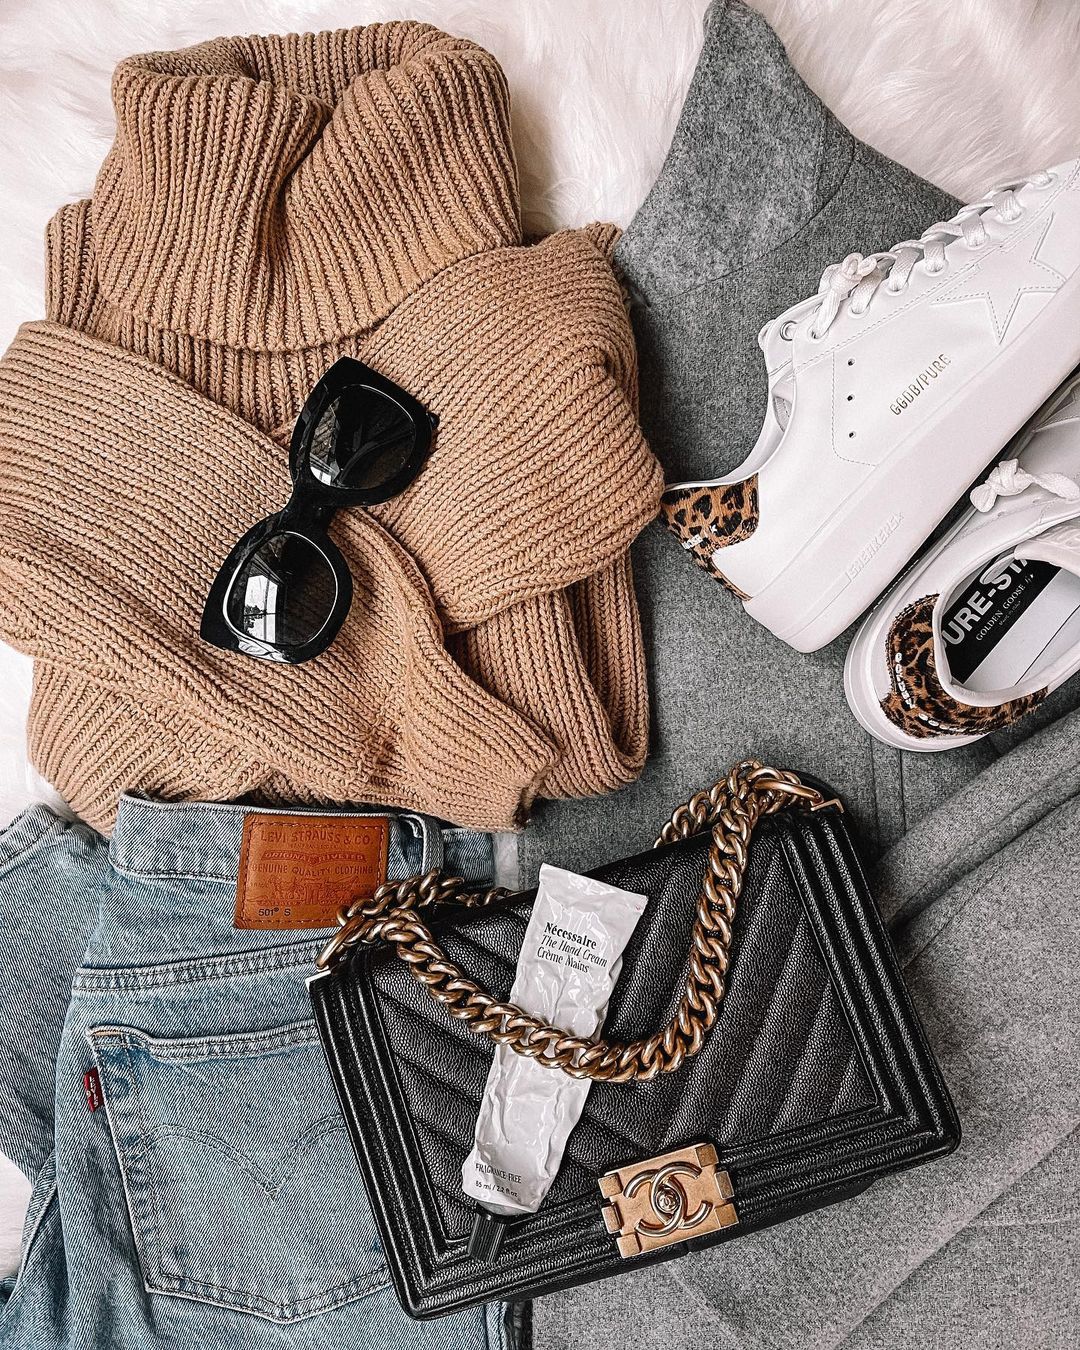 Earthy Tones Outfit With Basic Sweater Style Ideas